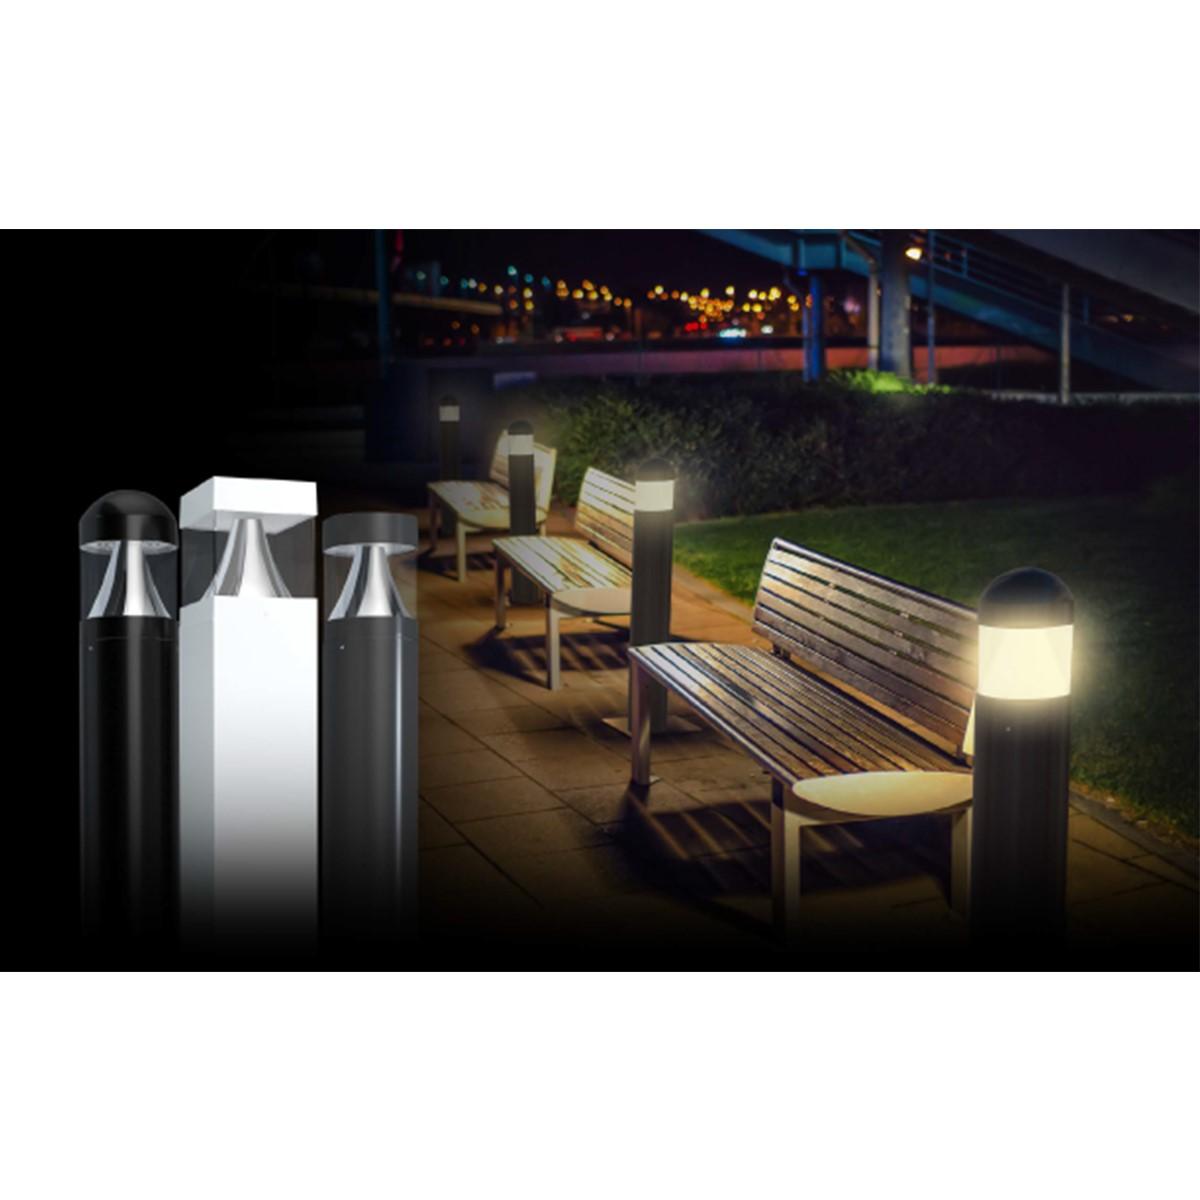 42 in. LED Bollard Lights With Photocell, 24 Watt, 30K/40K/50K Selectable CCT, 120-277V Input, Dome Top, Round Shape